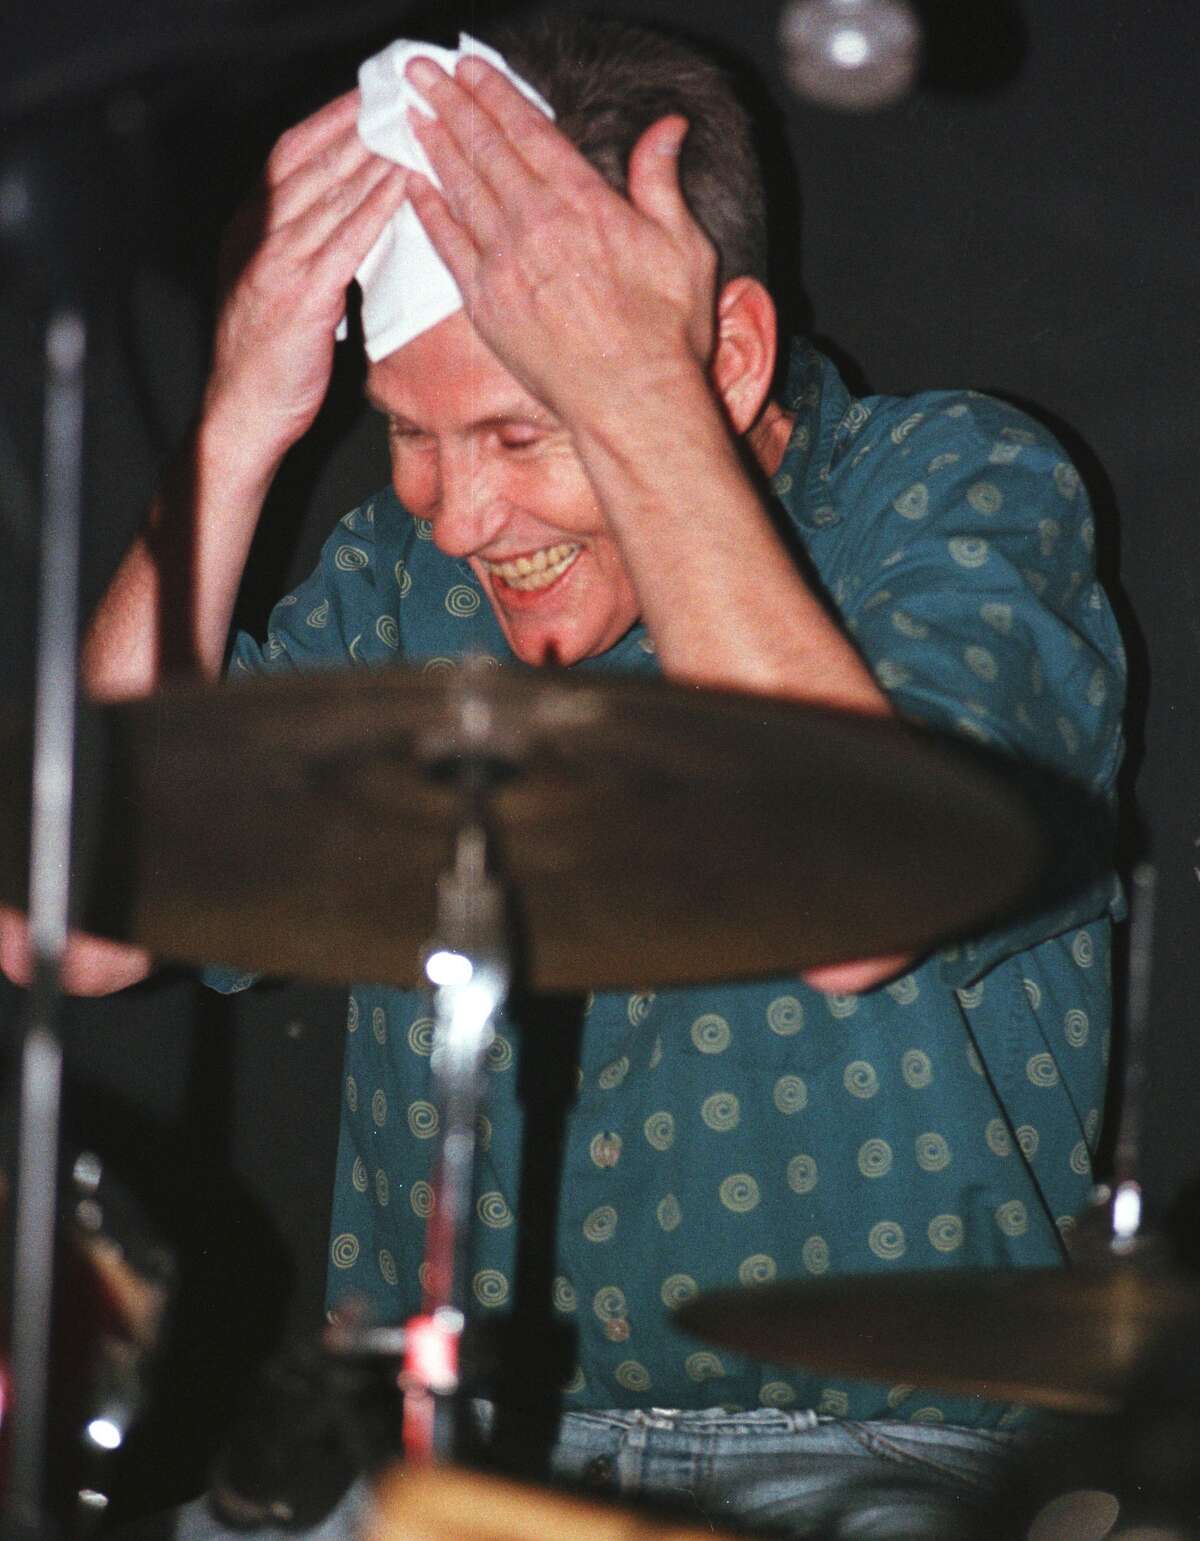 Special to the Times Union by Will Waldron. -- December 29 1999 -- Levon Helm famed The 'Band drummer' wipes a sweaty brow while performing with his new group the 'Barn Burners' during a performance at Joyous Lake Nightclub in Woodstock.